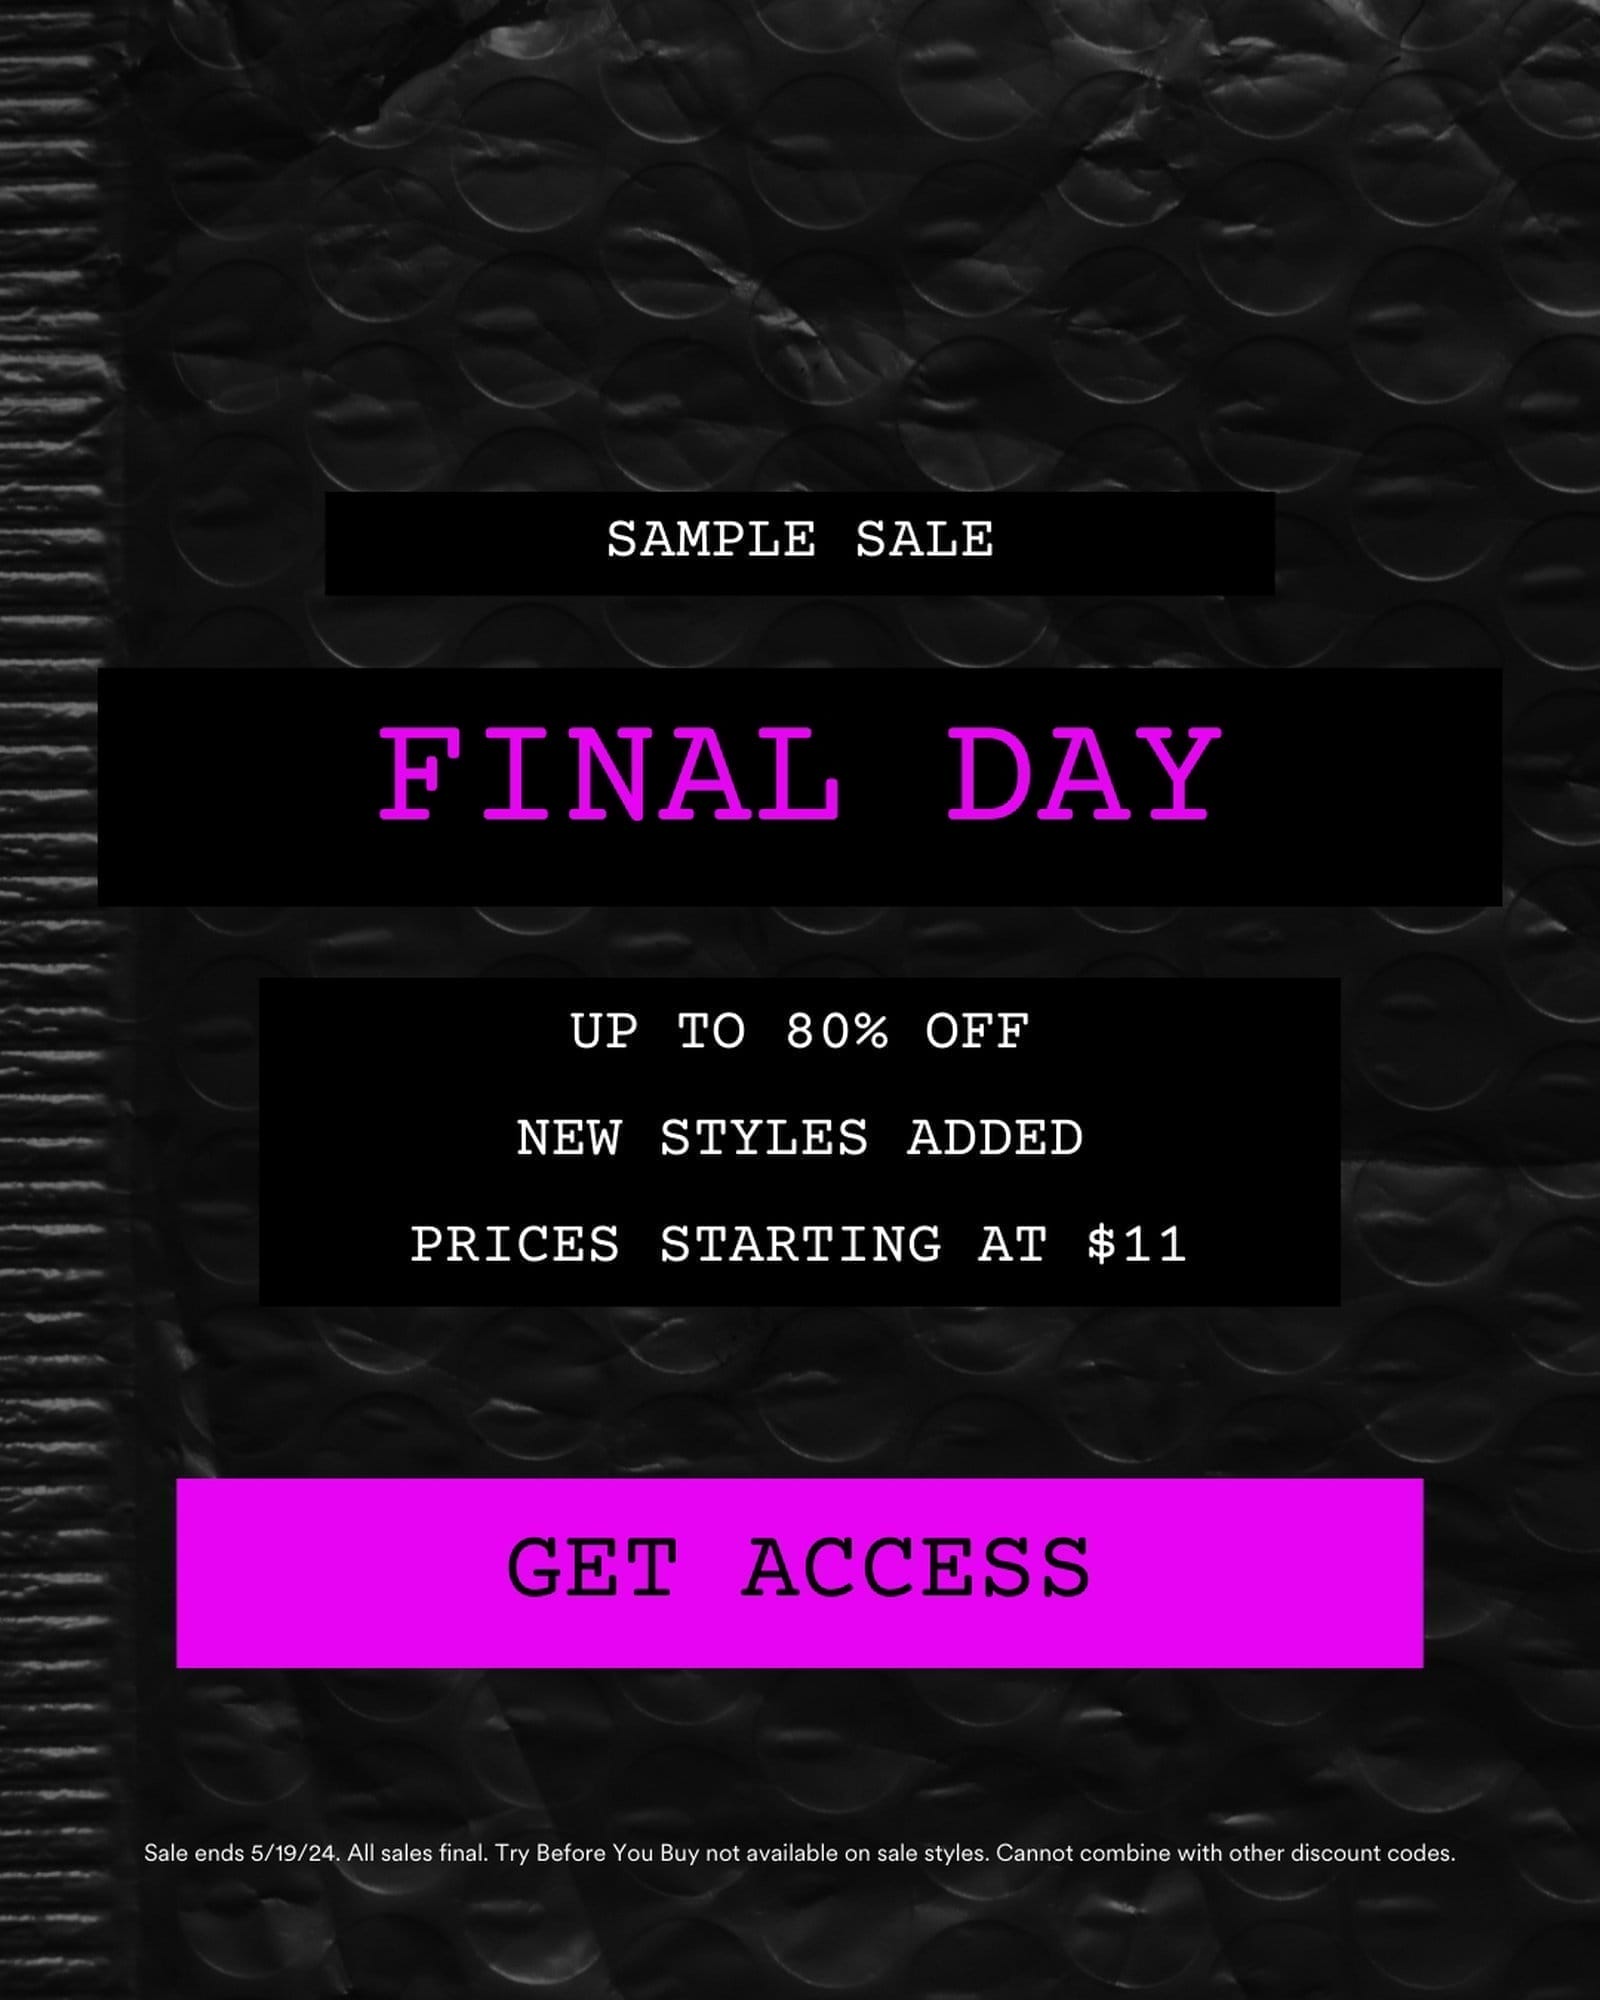 Sample Sale. Up to 80% OFF. Limited Time Event. Get Access